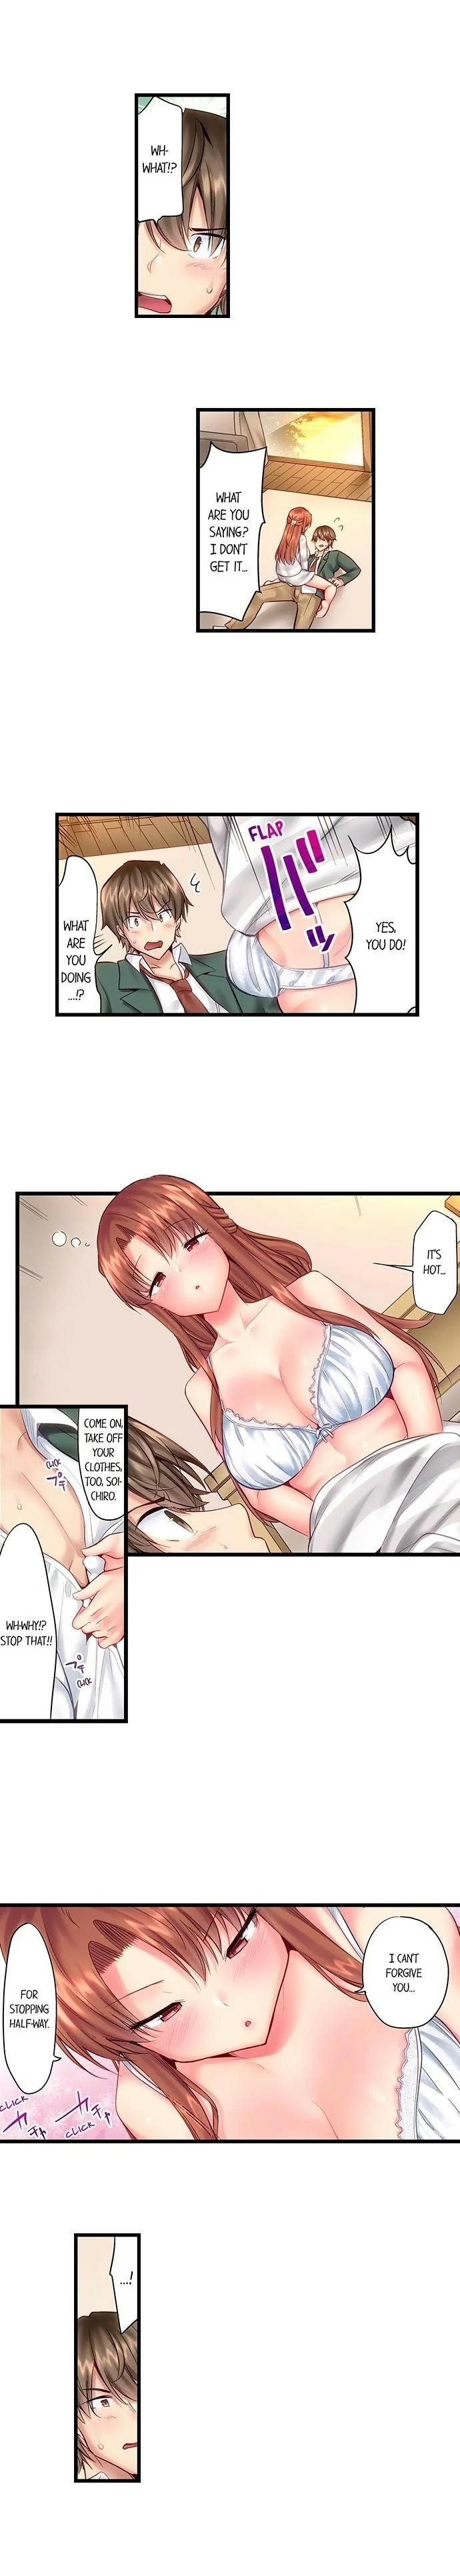 [Yuuki HB] "Hypnotized" Sex with My Brother Ch.21/? [English] [Ongoing] 58